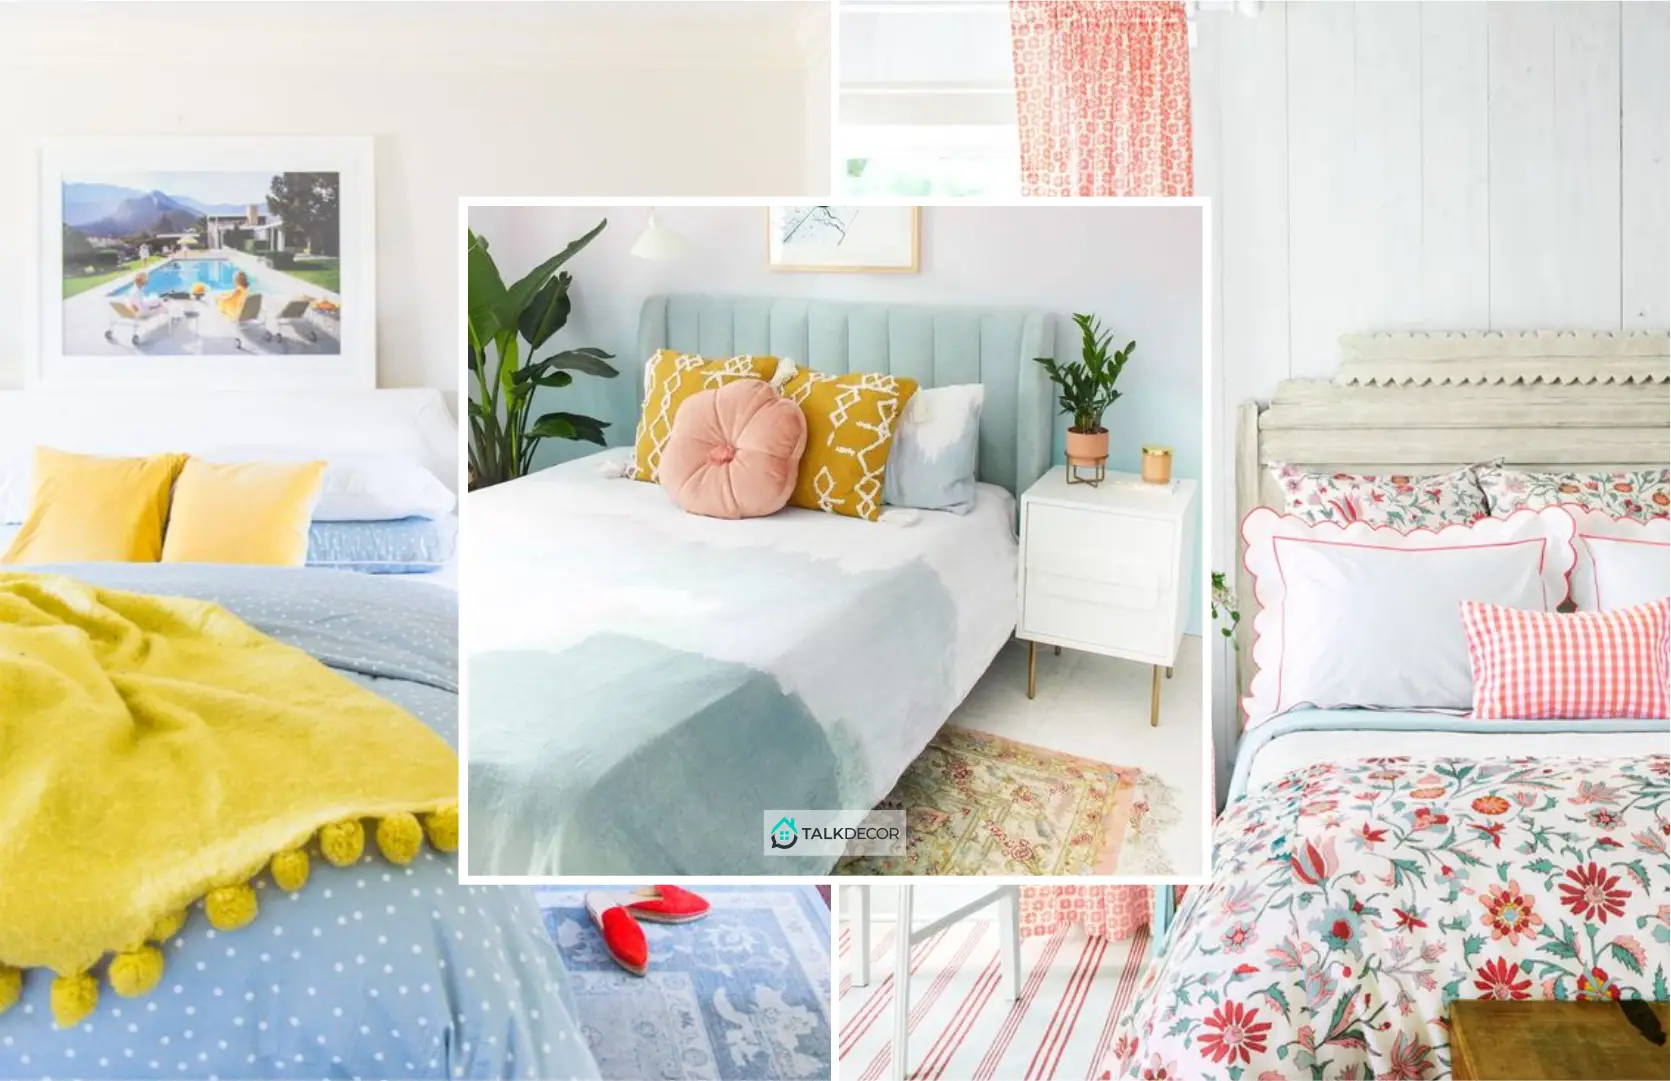 How to Create a Pretty Bed Spring Decoration